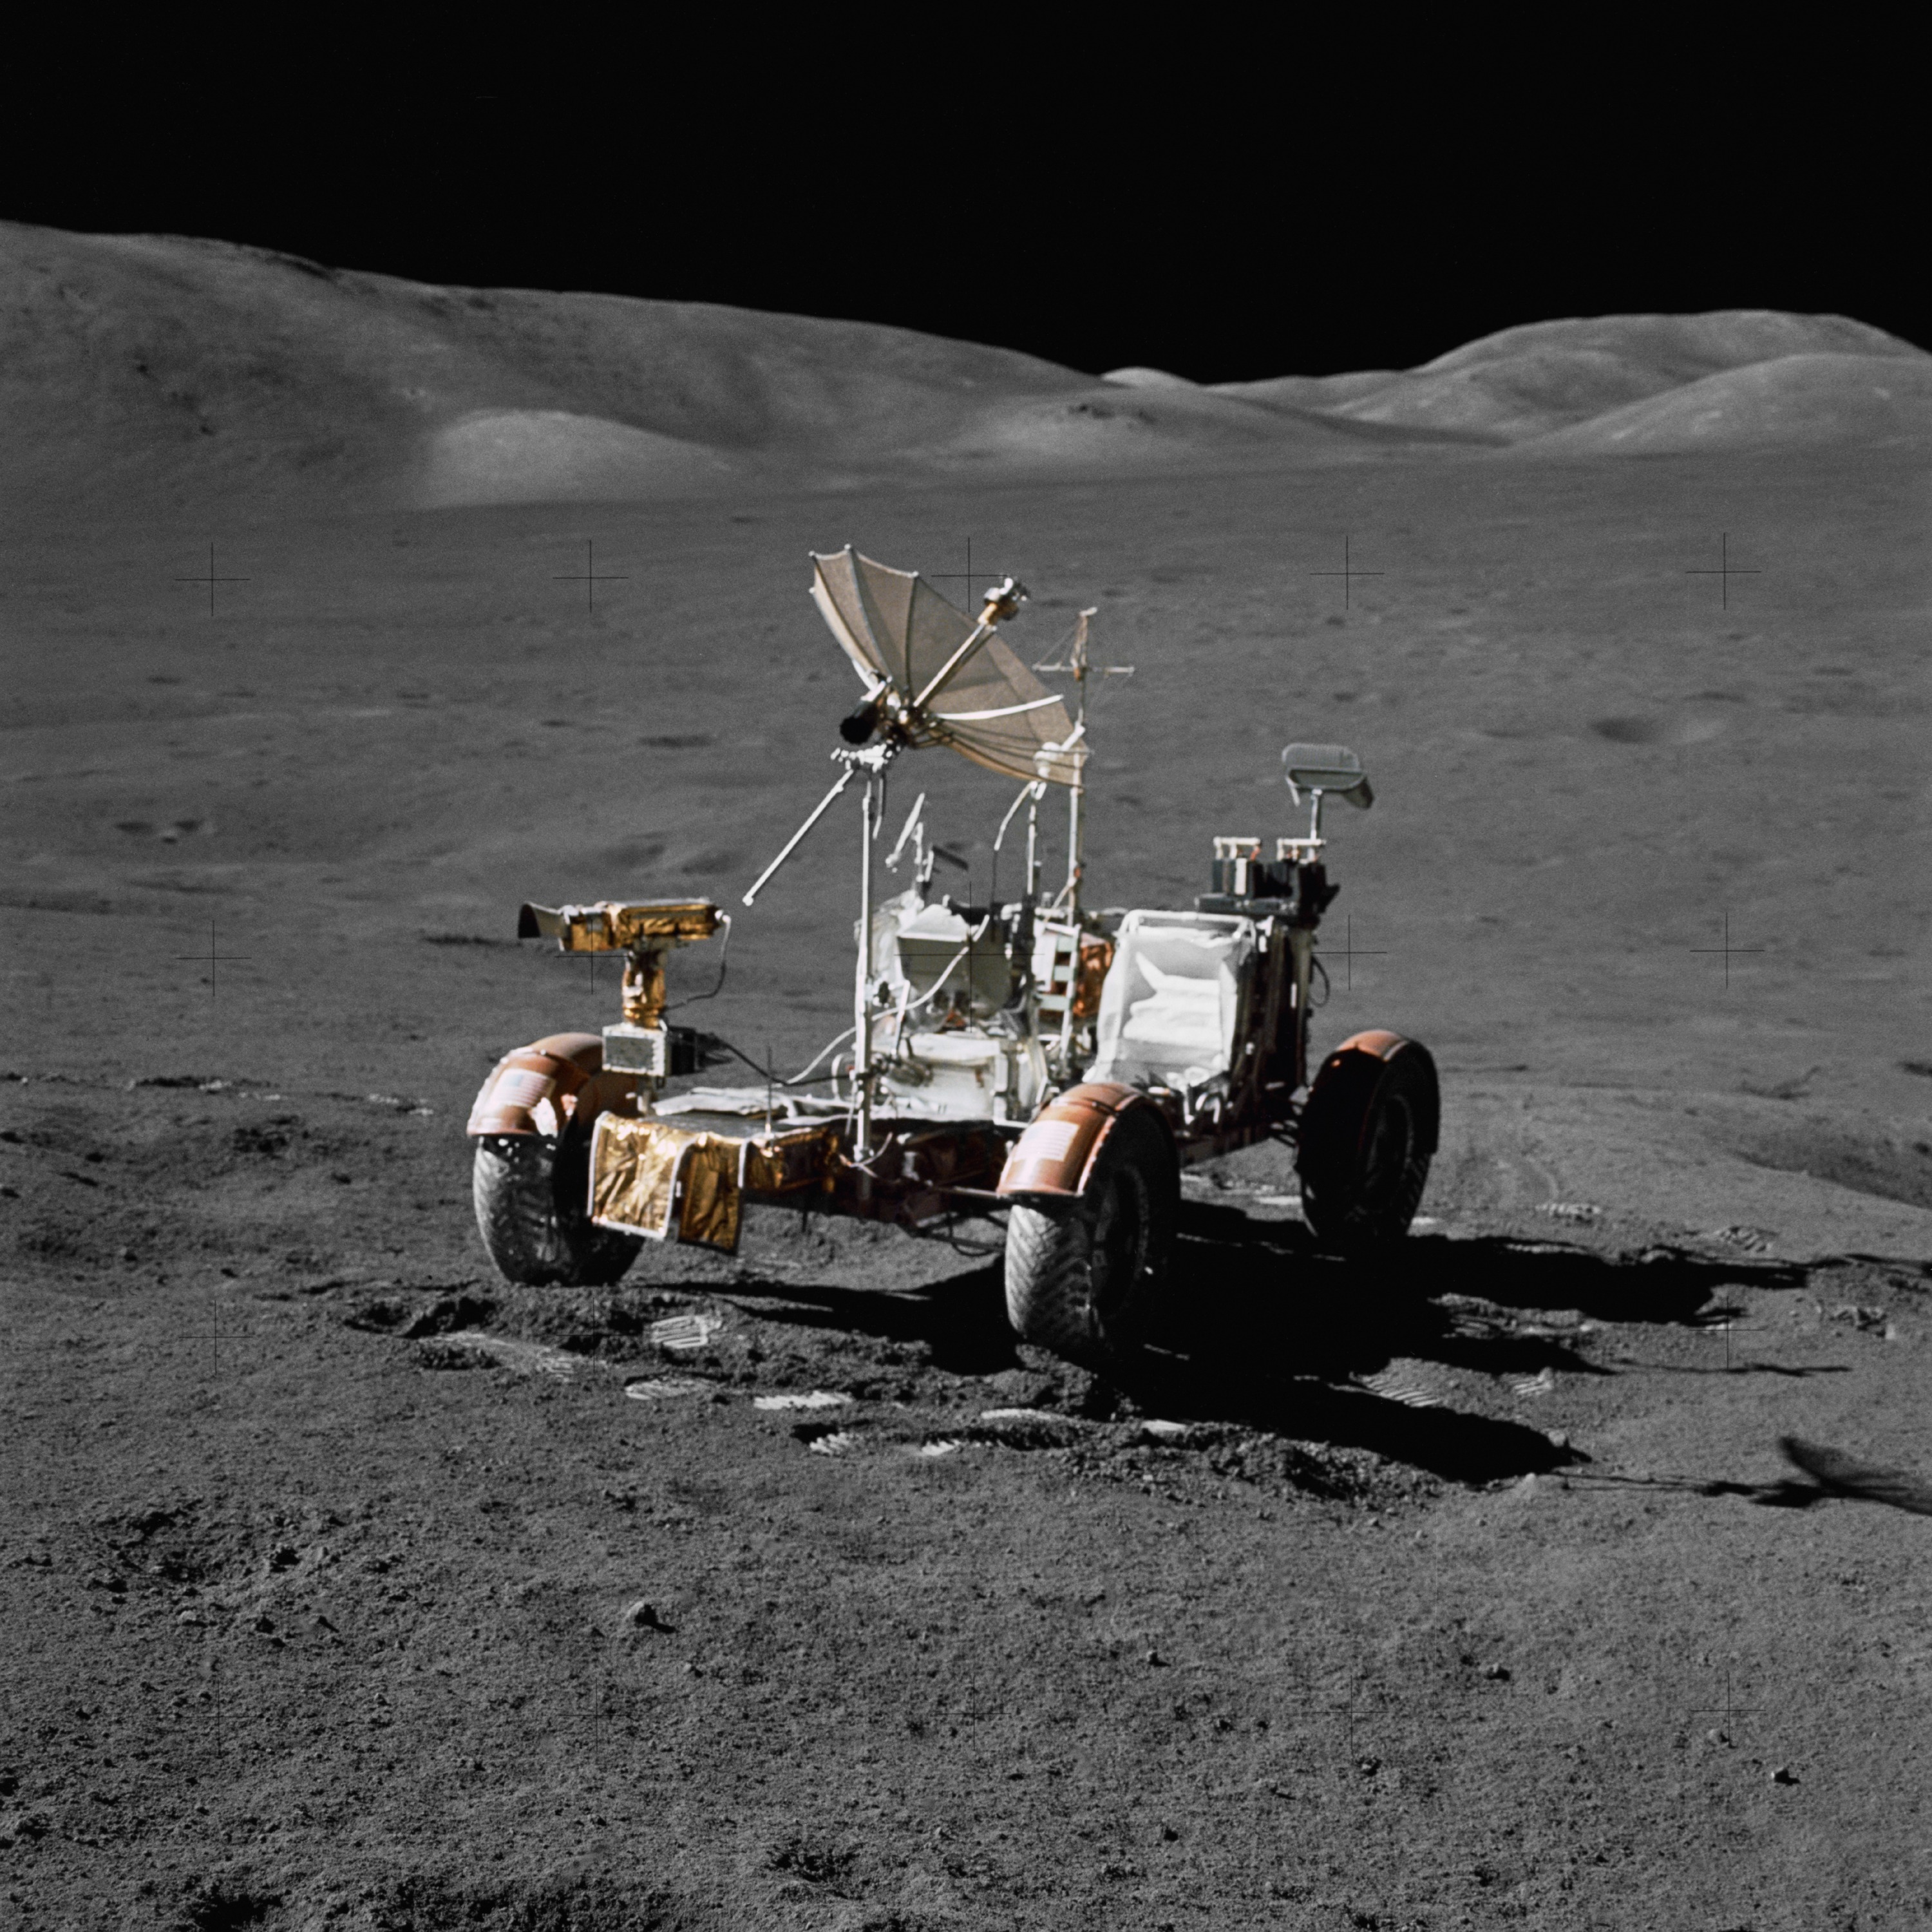 Lunar Roving Vehicle moon buggy on the Moon during Apollo 15 mission Photo Print 